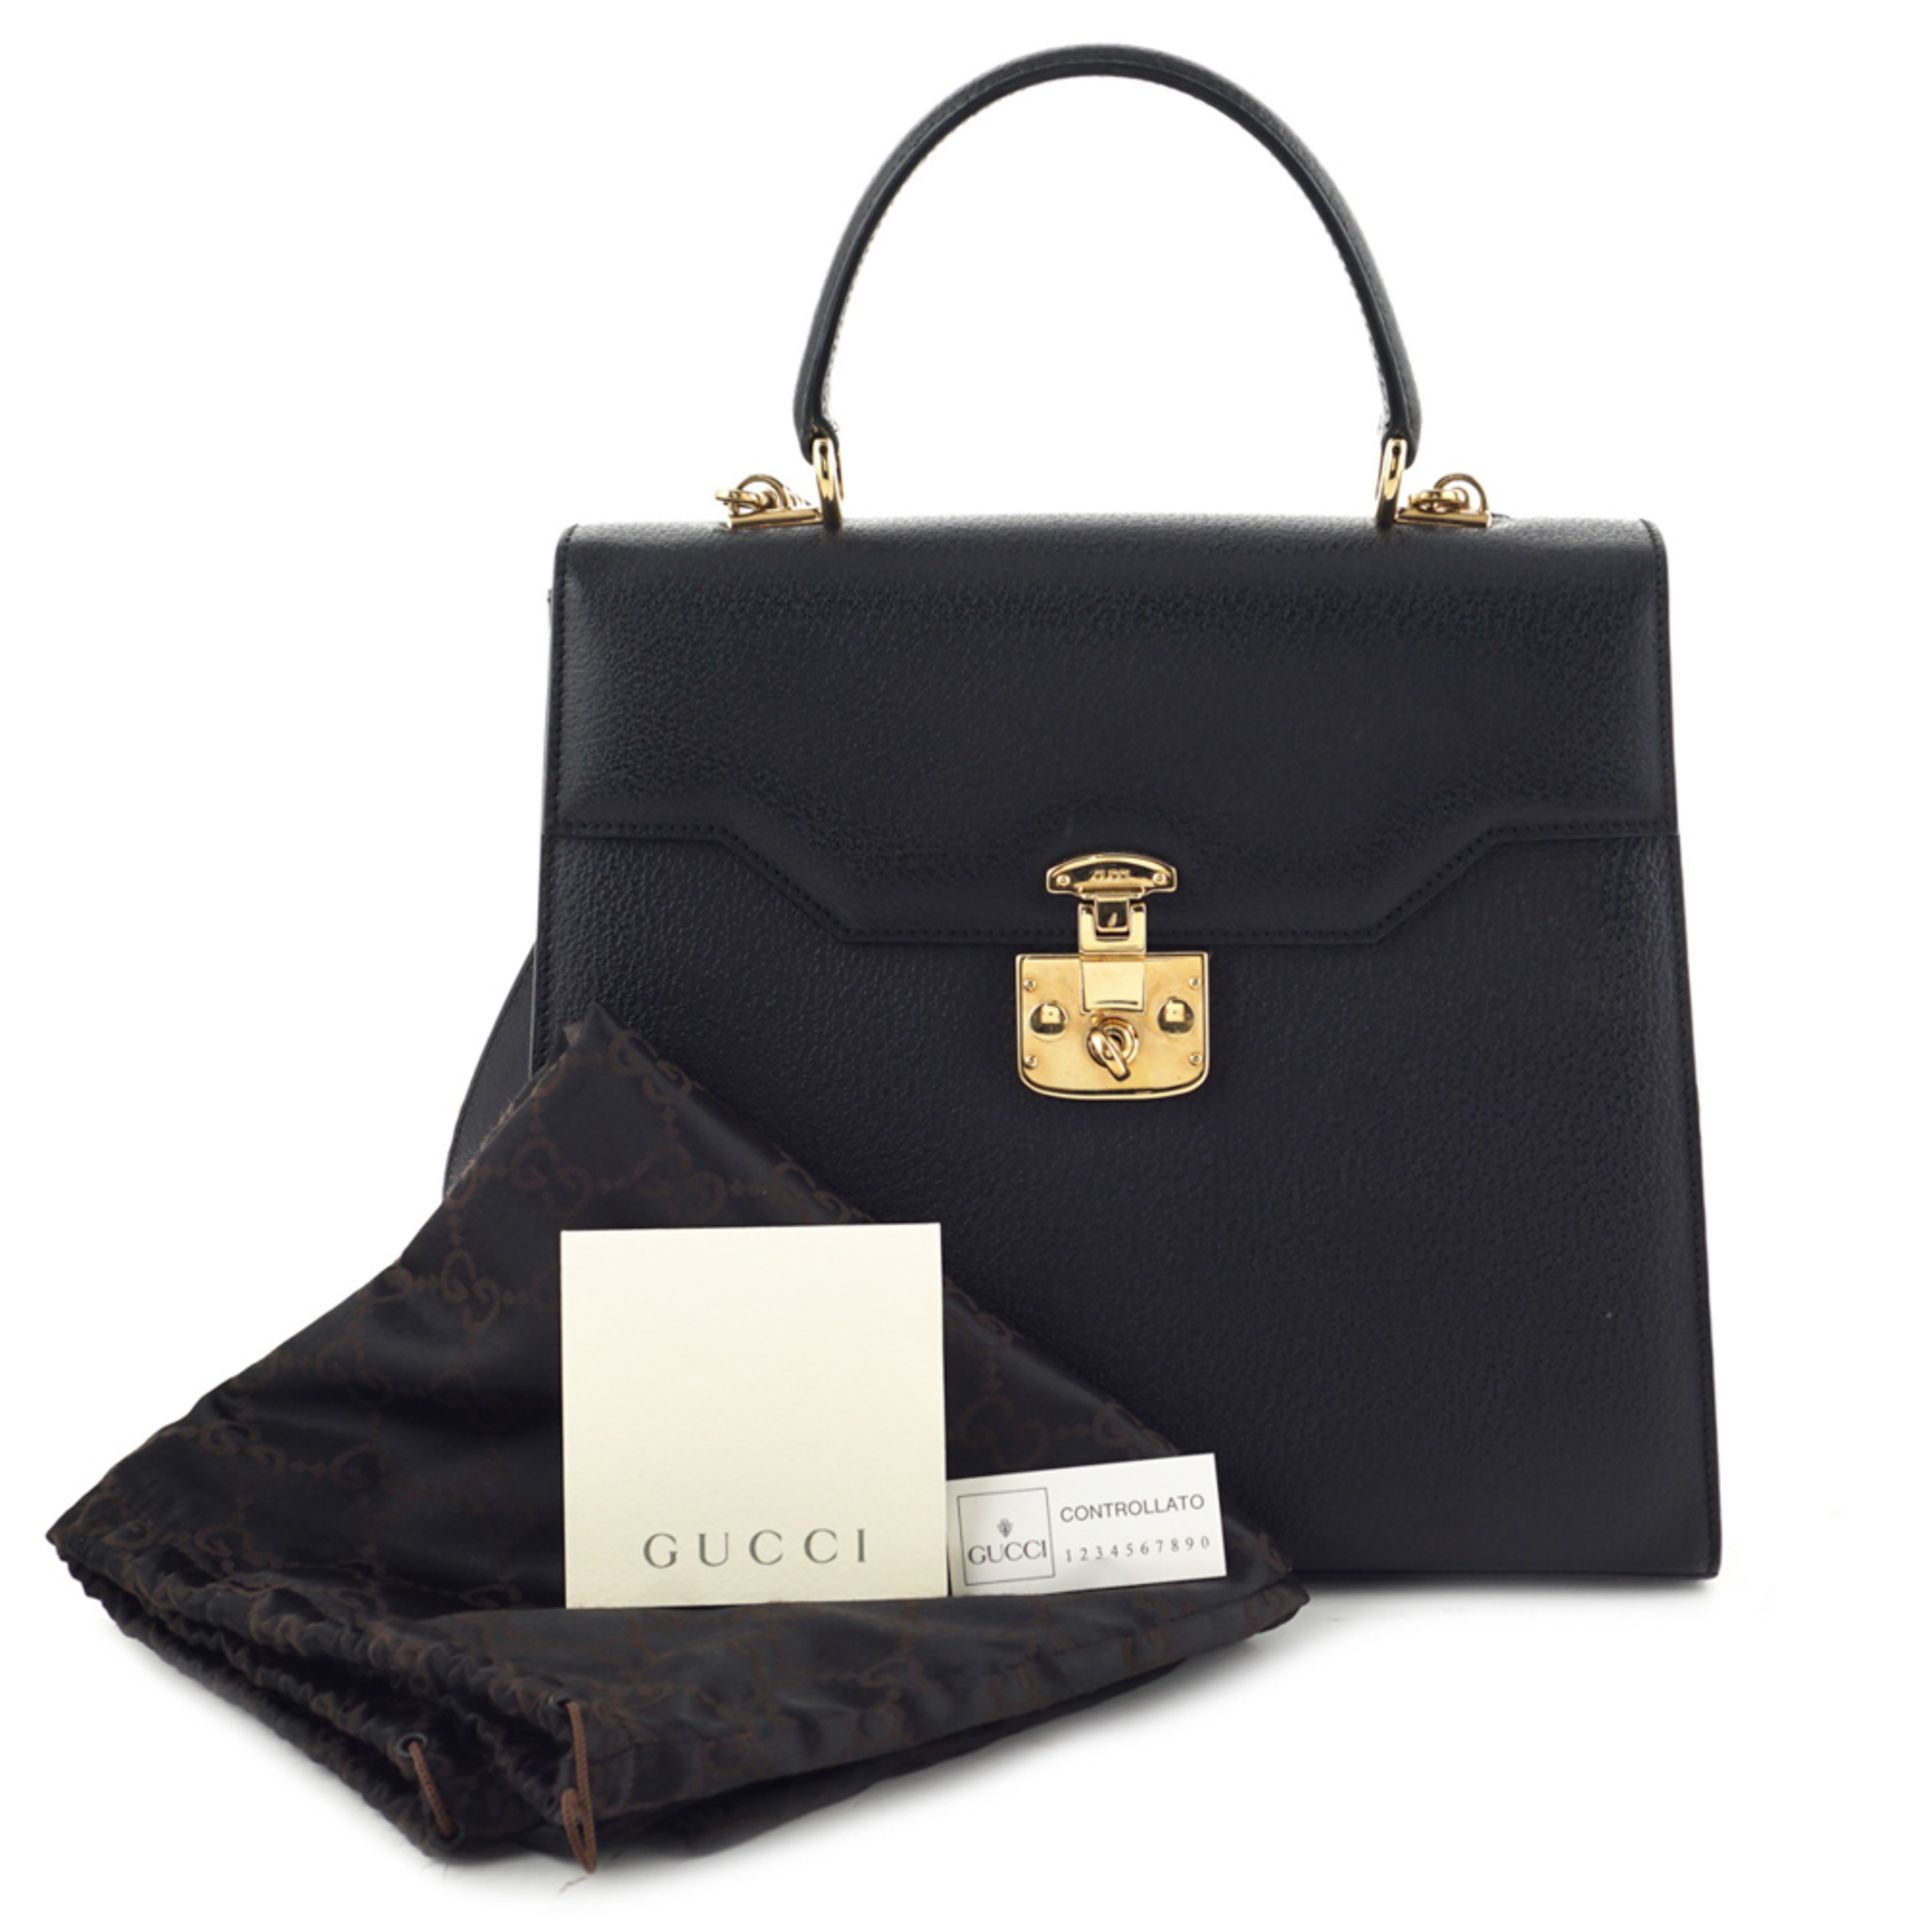 Gucci, Lady Lock collection bag 25x28,5x10 cm - Image 2 of 6